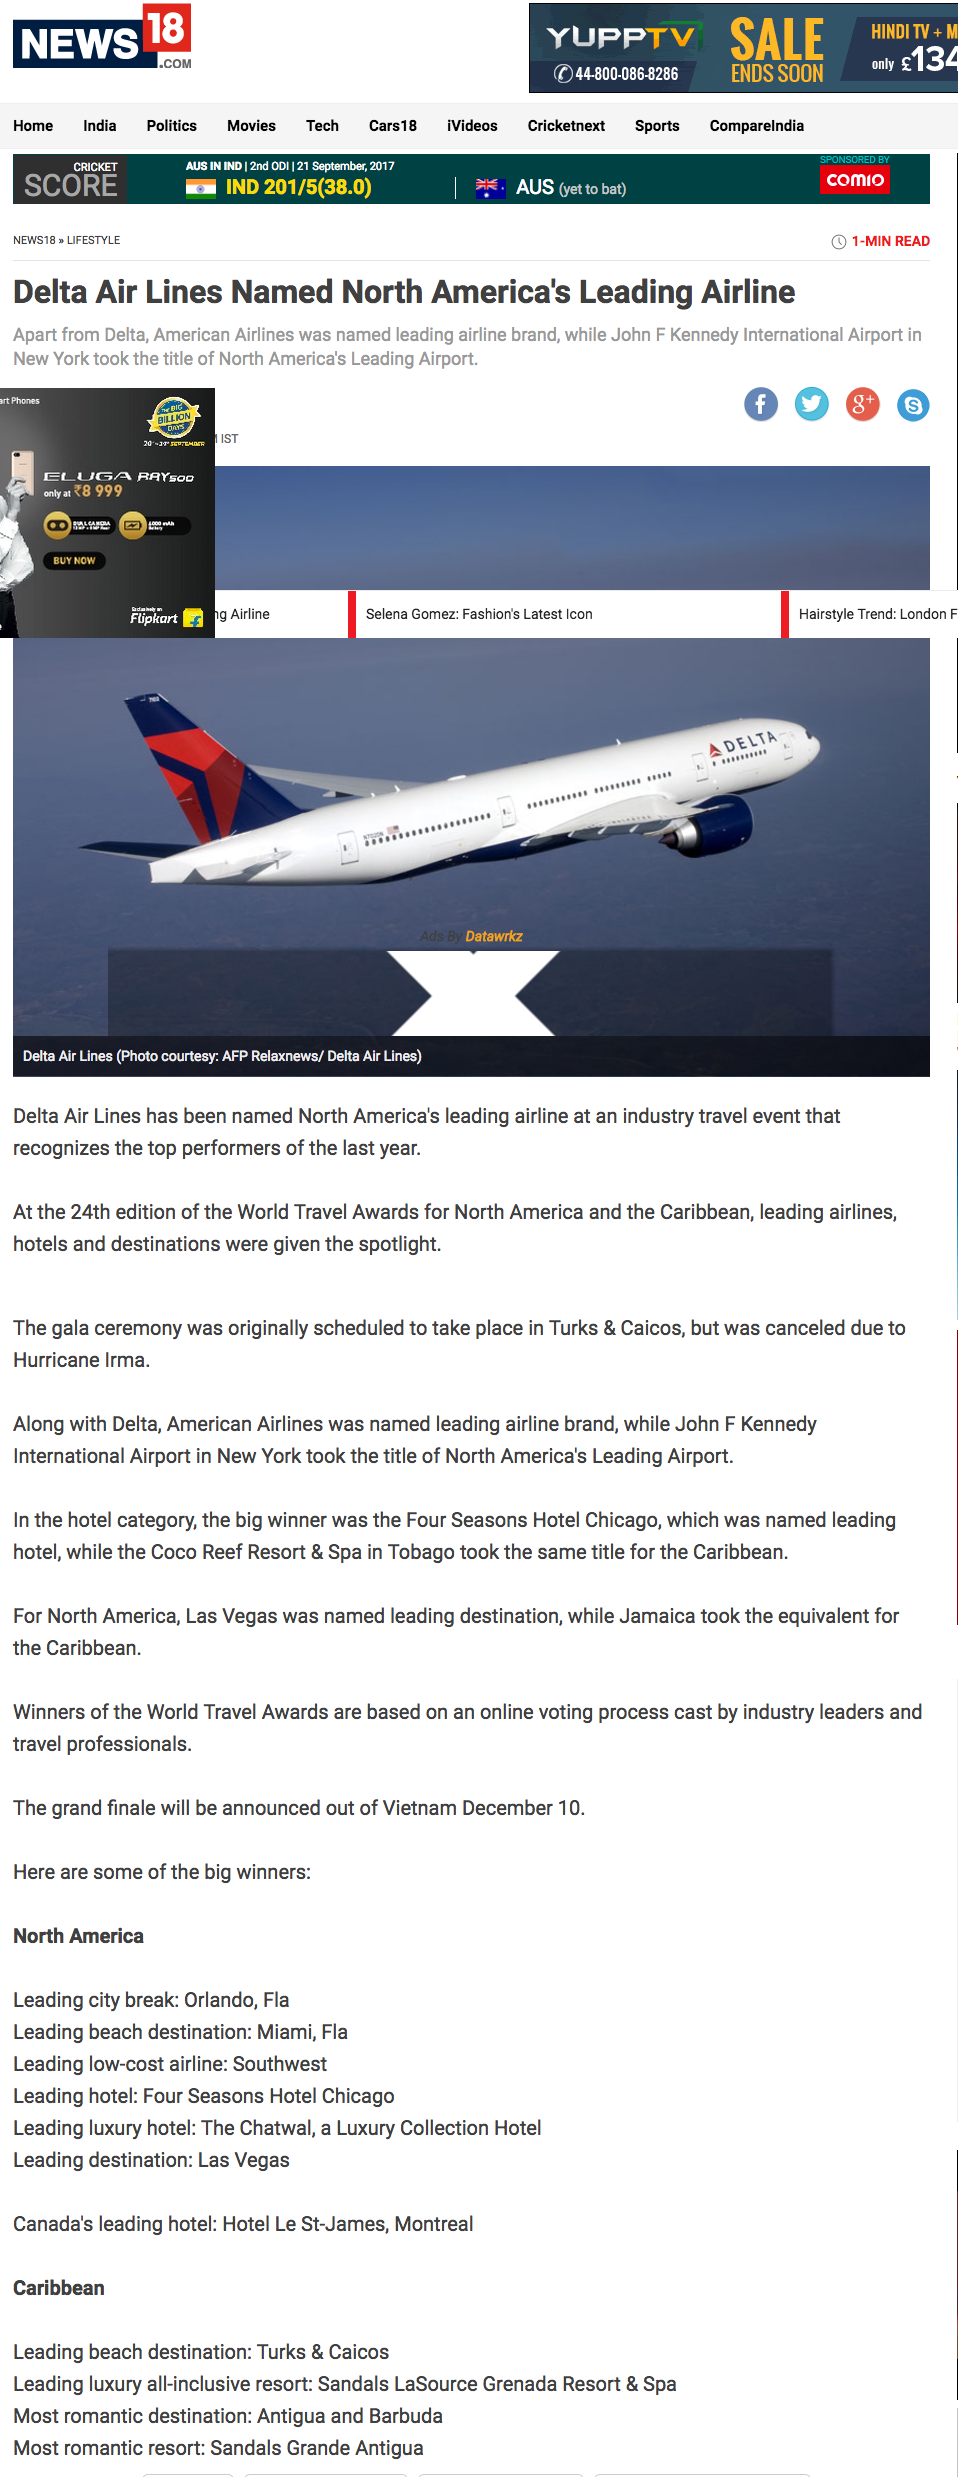 Delta Air Lines Named North America Leading Airline